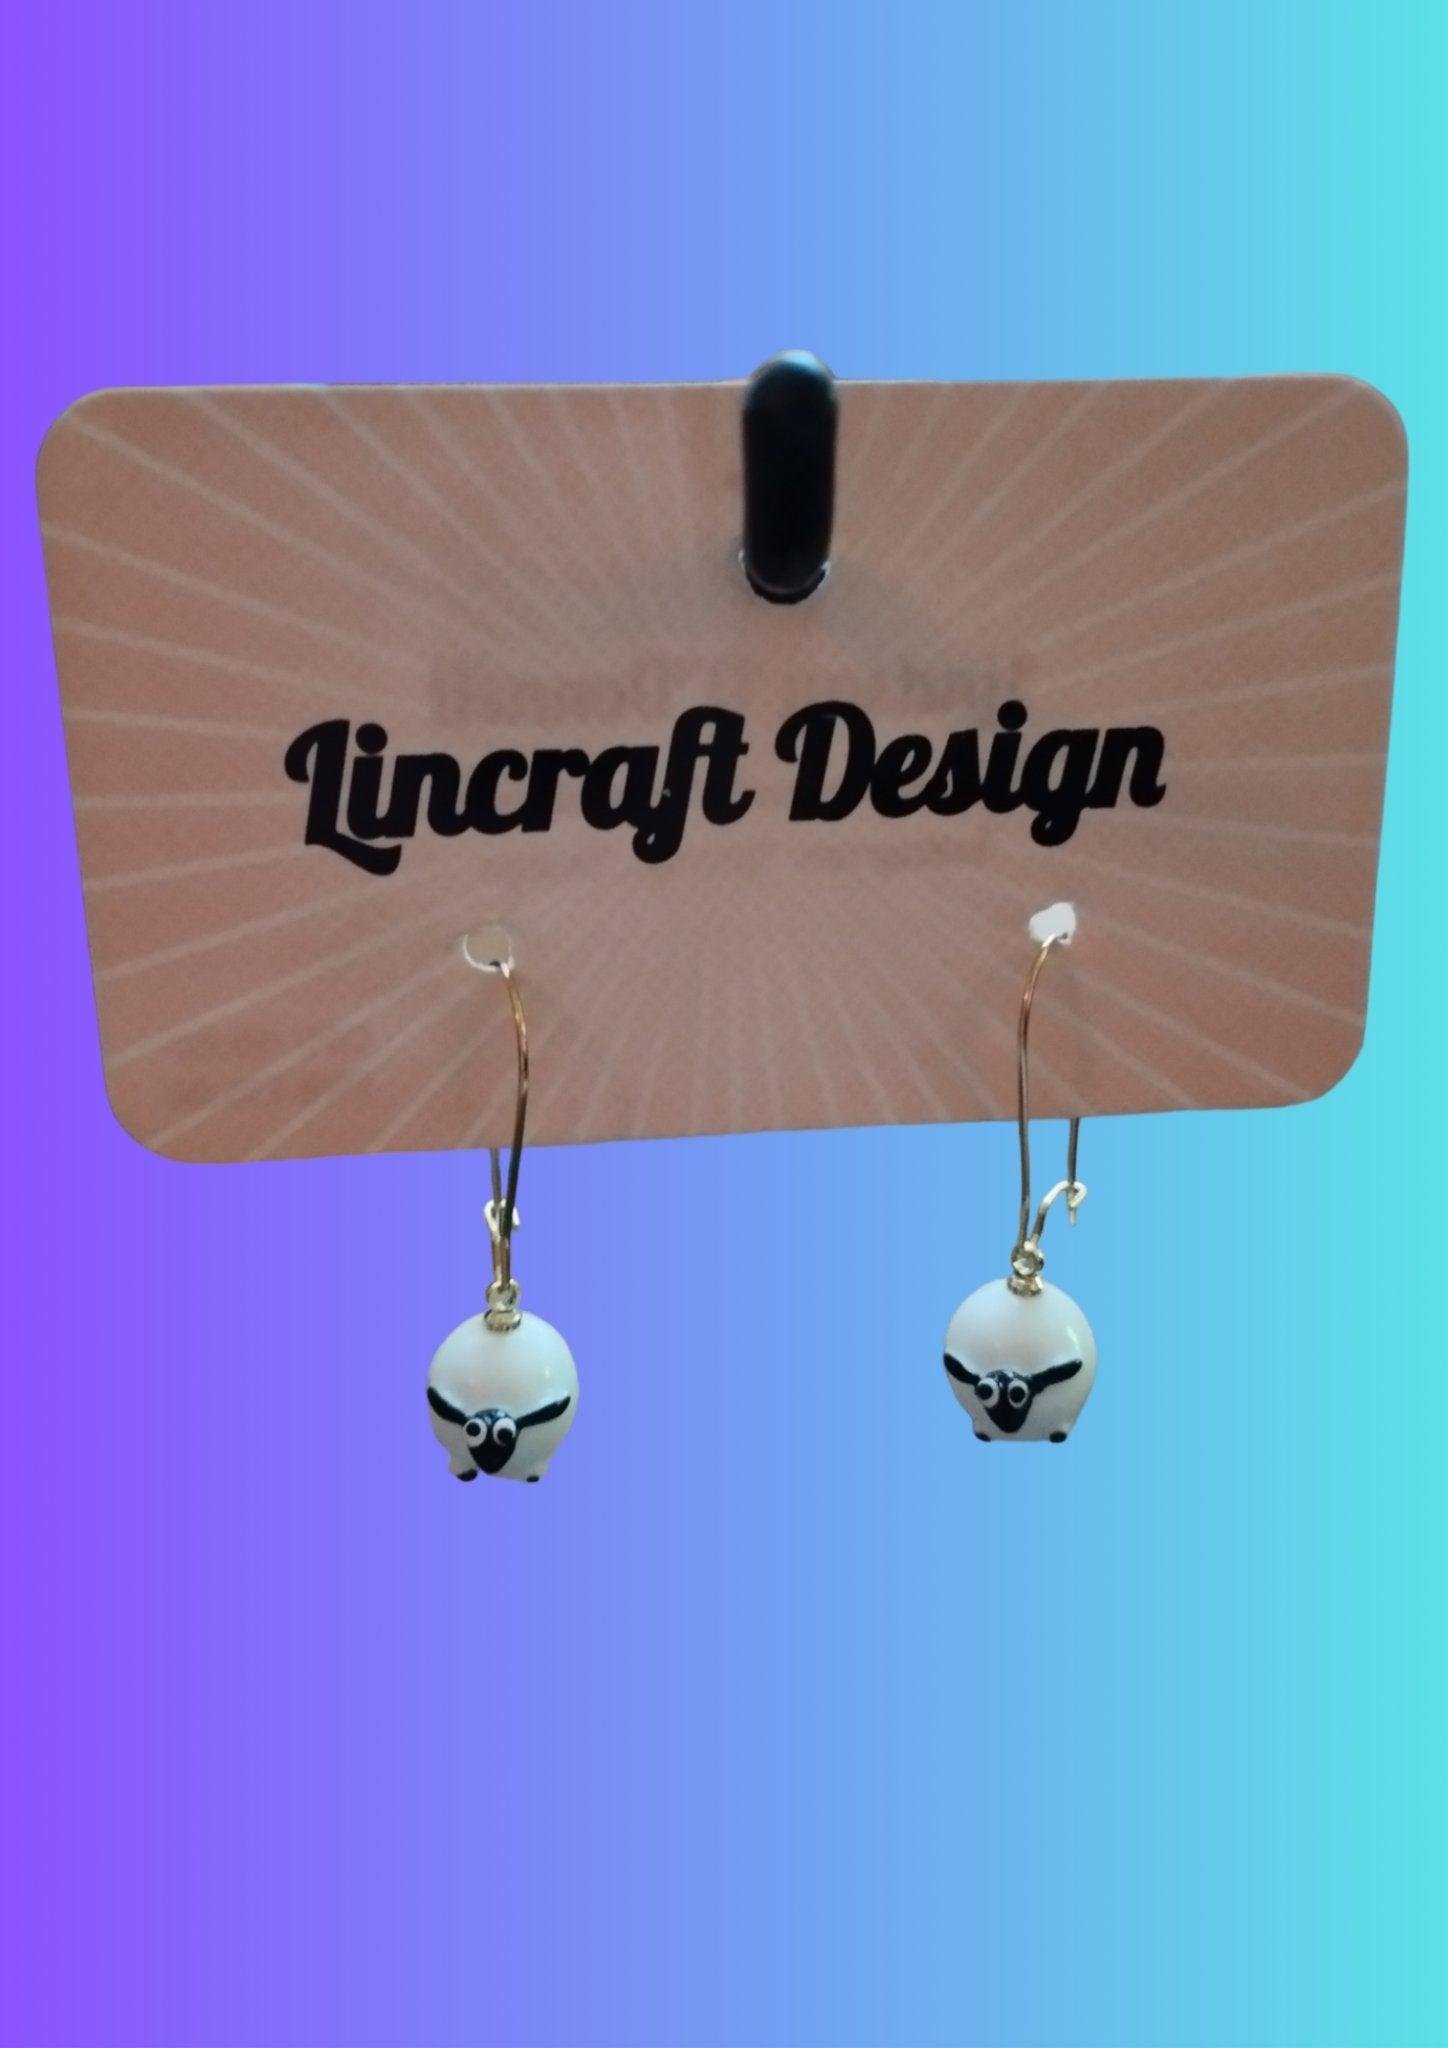 "Fluffy Sheep Resin Earrings - Handmade Irish Jewelry by Lindsay O'Donnell. On display card